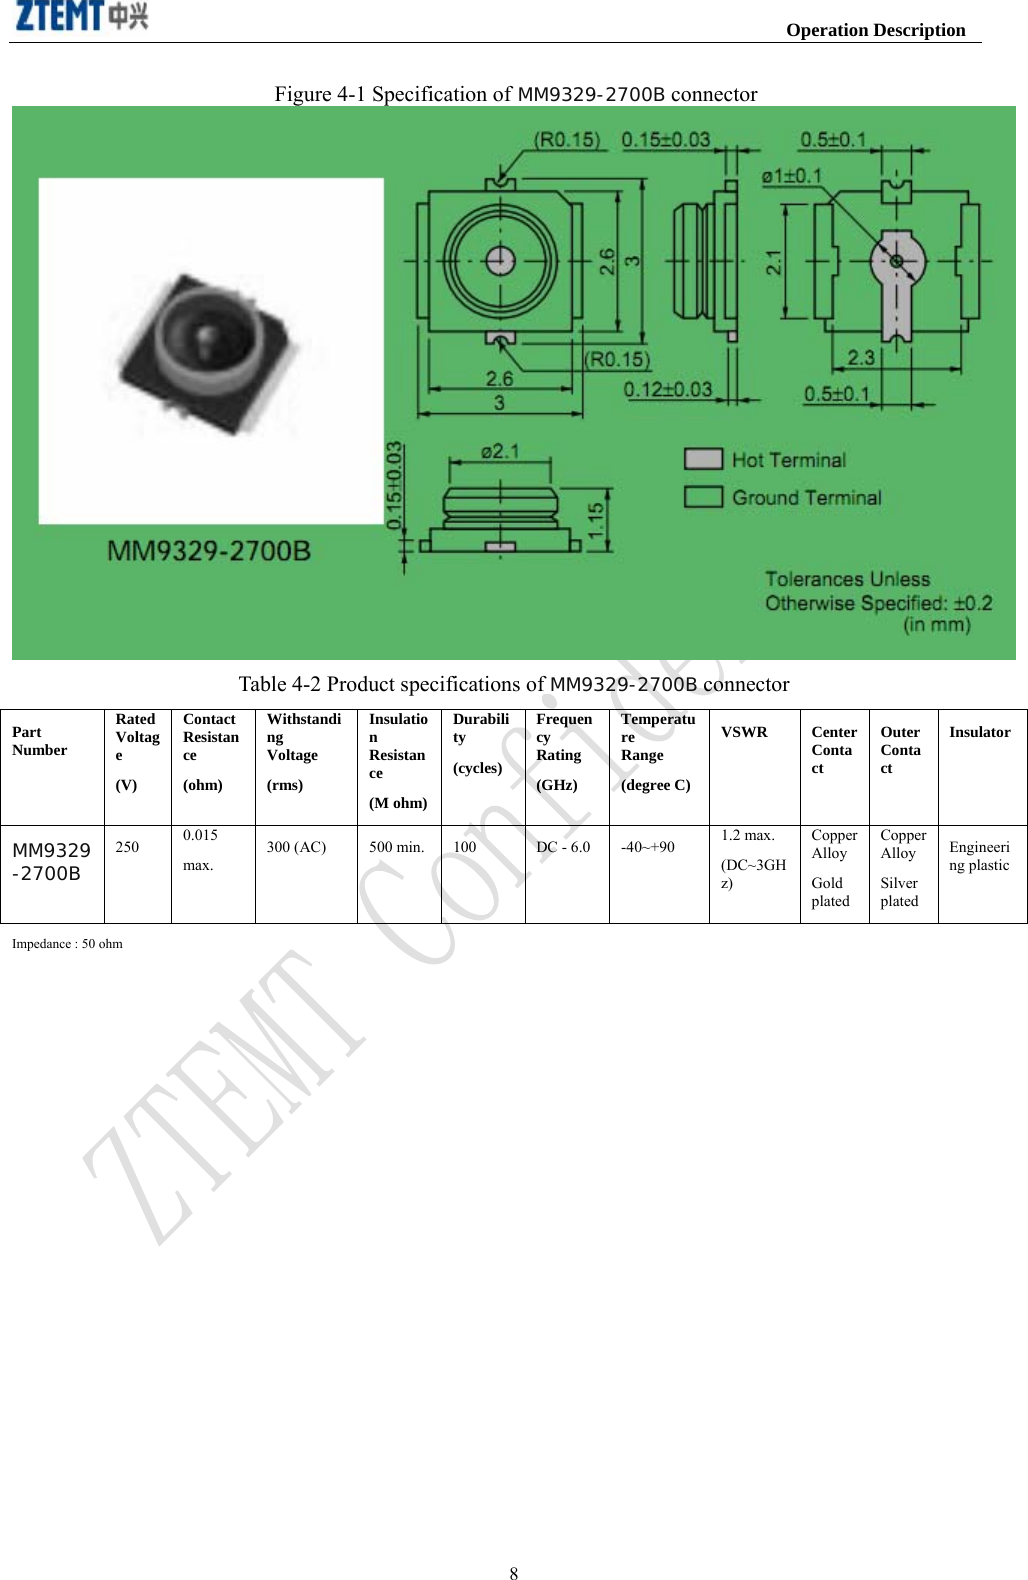                                                                     Operation Description  8Figure 4-1 Specification of MM9329-2700B connector  Table 4-2 Product specifications of MM9329-2700B connector Part Number Rated Voltage (V) Contact Resistance (ohm) Withstanding Voltage (rms) Insulation Resistance (M ohm)Durability (cycles) Frequency Rating (GHz) Temperature Range (degree C)VSWR Center Contact Outer Contact InsulatorMM9329-2700B 250 0.015 max. 300 (AC) 500 min. 100 DC - 6.0 -40~+90 1.2 max. (DC~3GHz) Copper Alloy Gold plated Copper Alloy Silver plated Engineering plasticImpedance : 50 ohm     